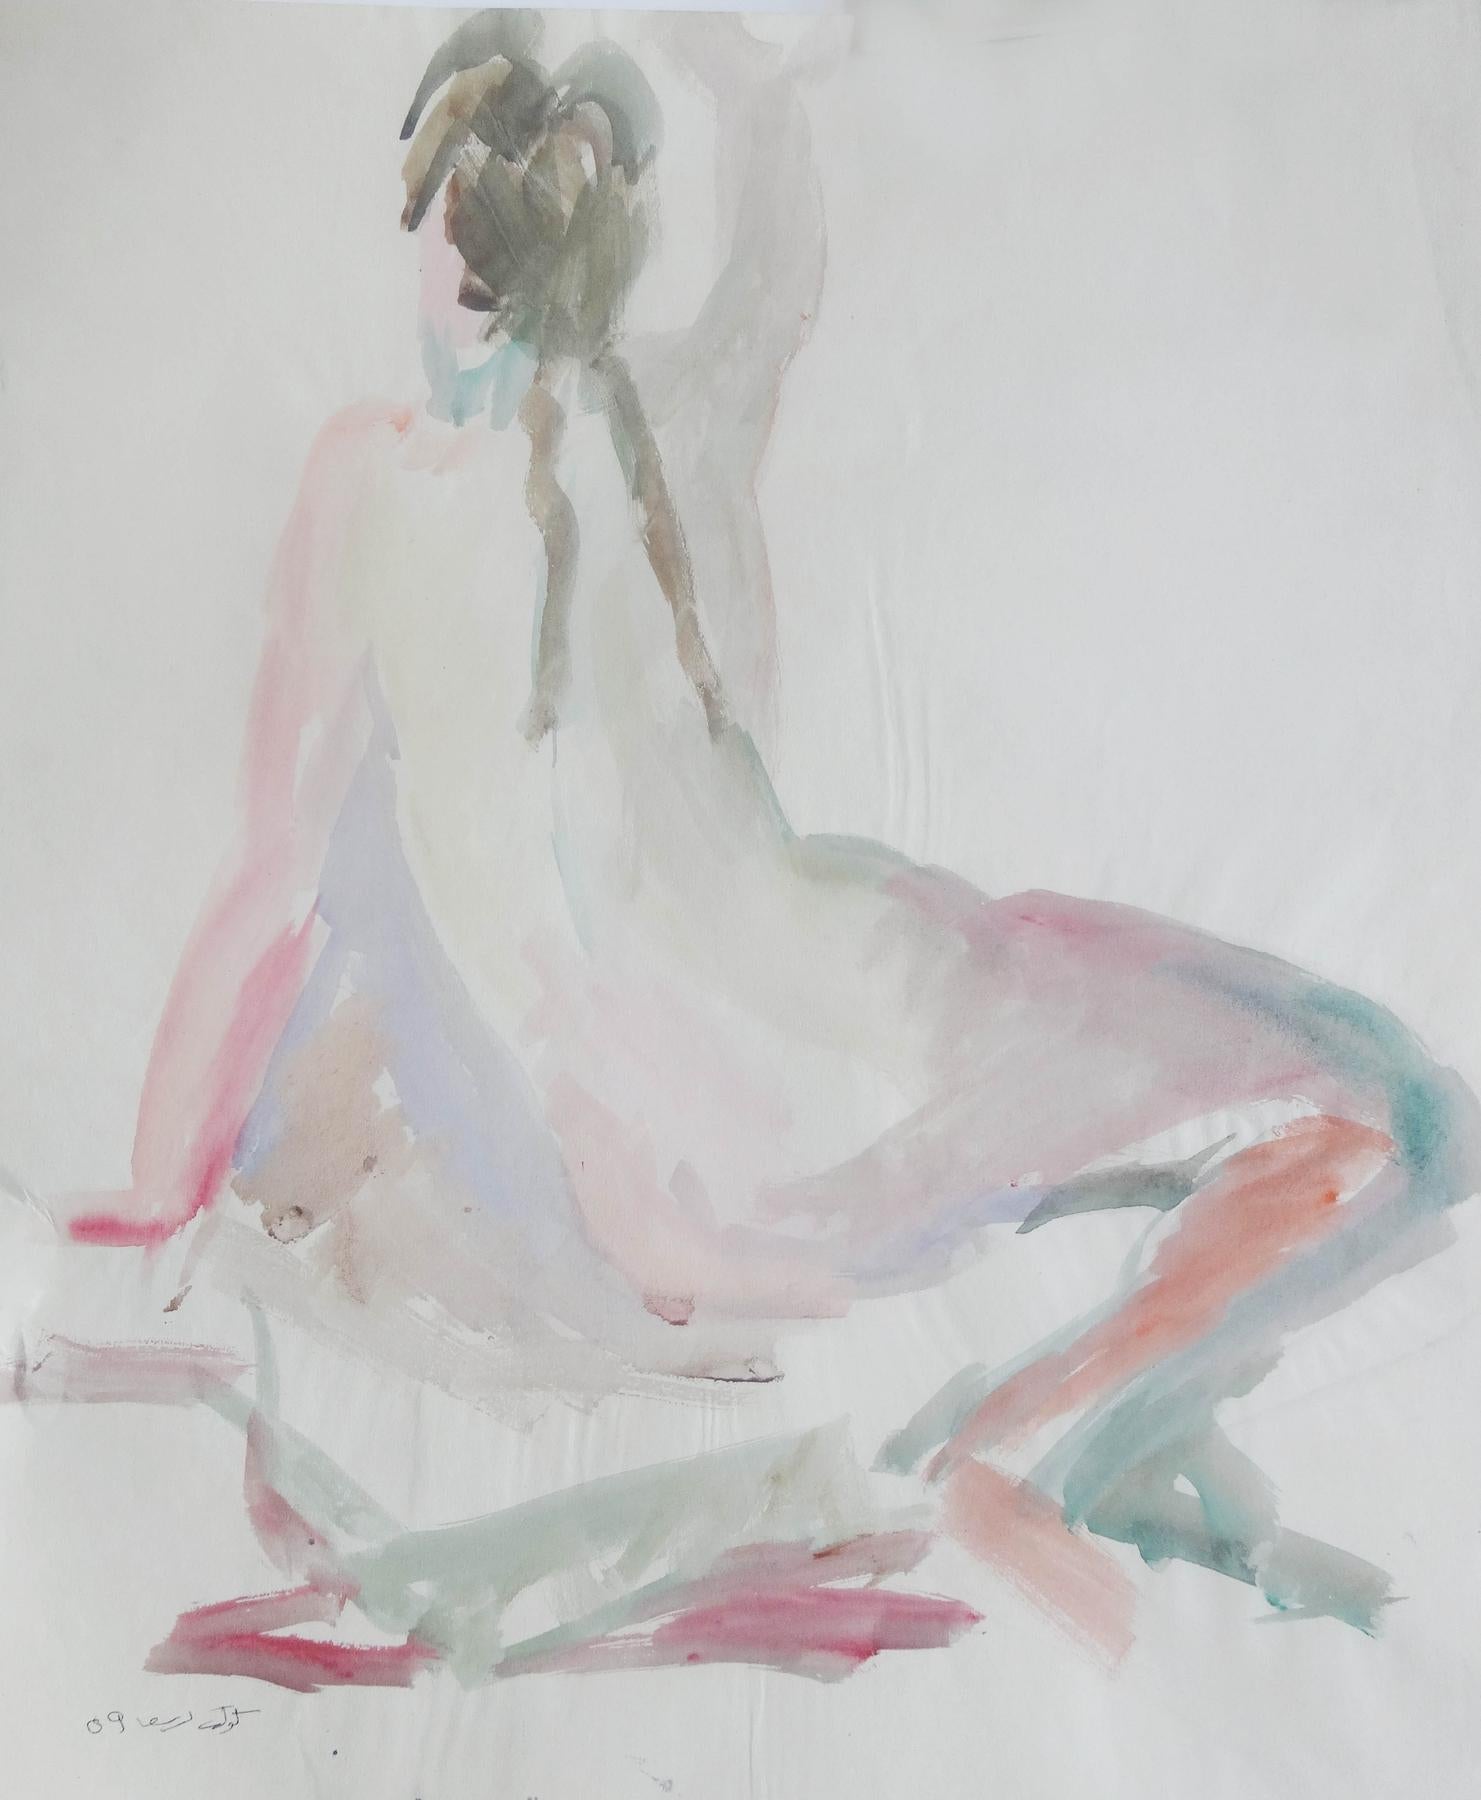 "Bathing Nude III" Watercolor Painting 24" x 17" inch (1959) by Kawkab Youssef 